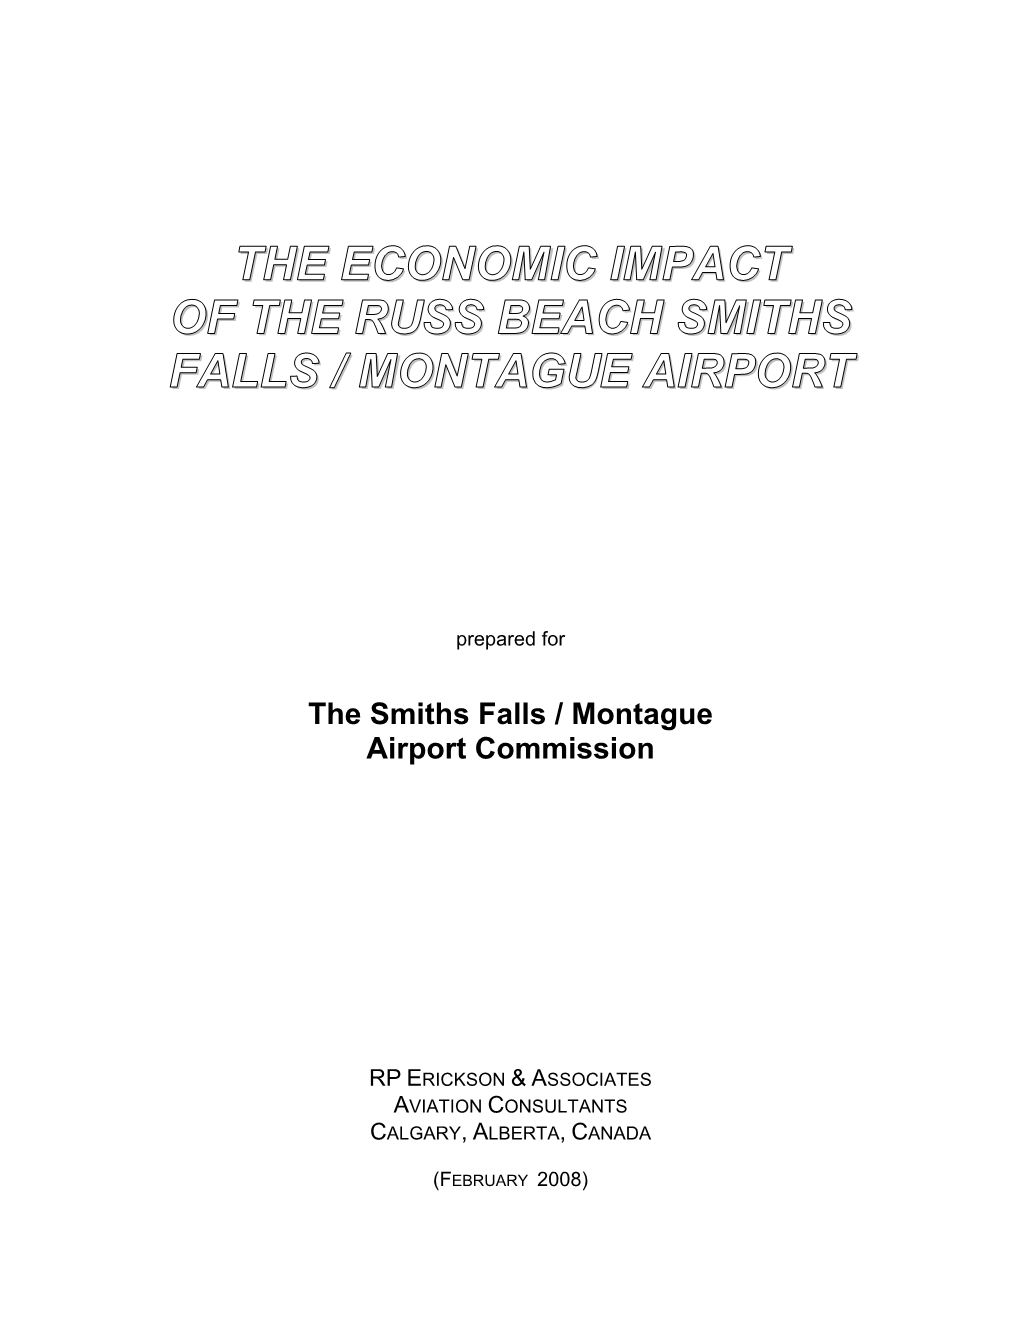 The Economic Impact of the Russ Beach Smiths Falls / Montague Airport